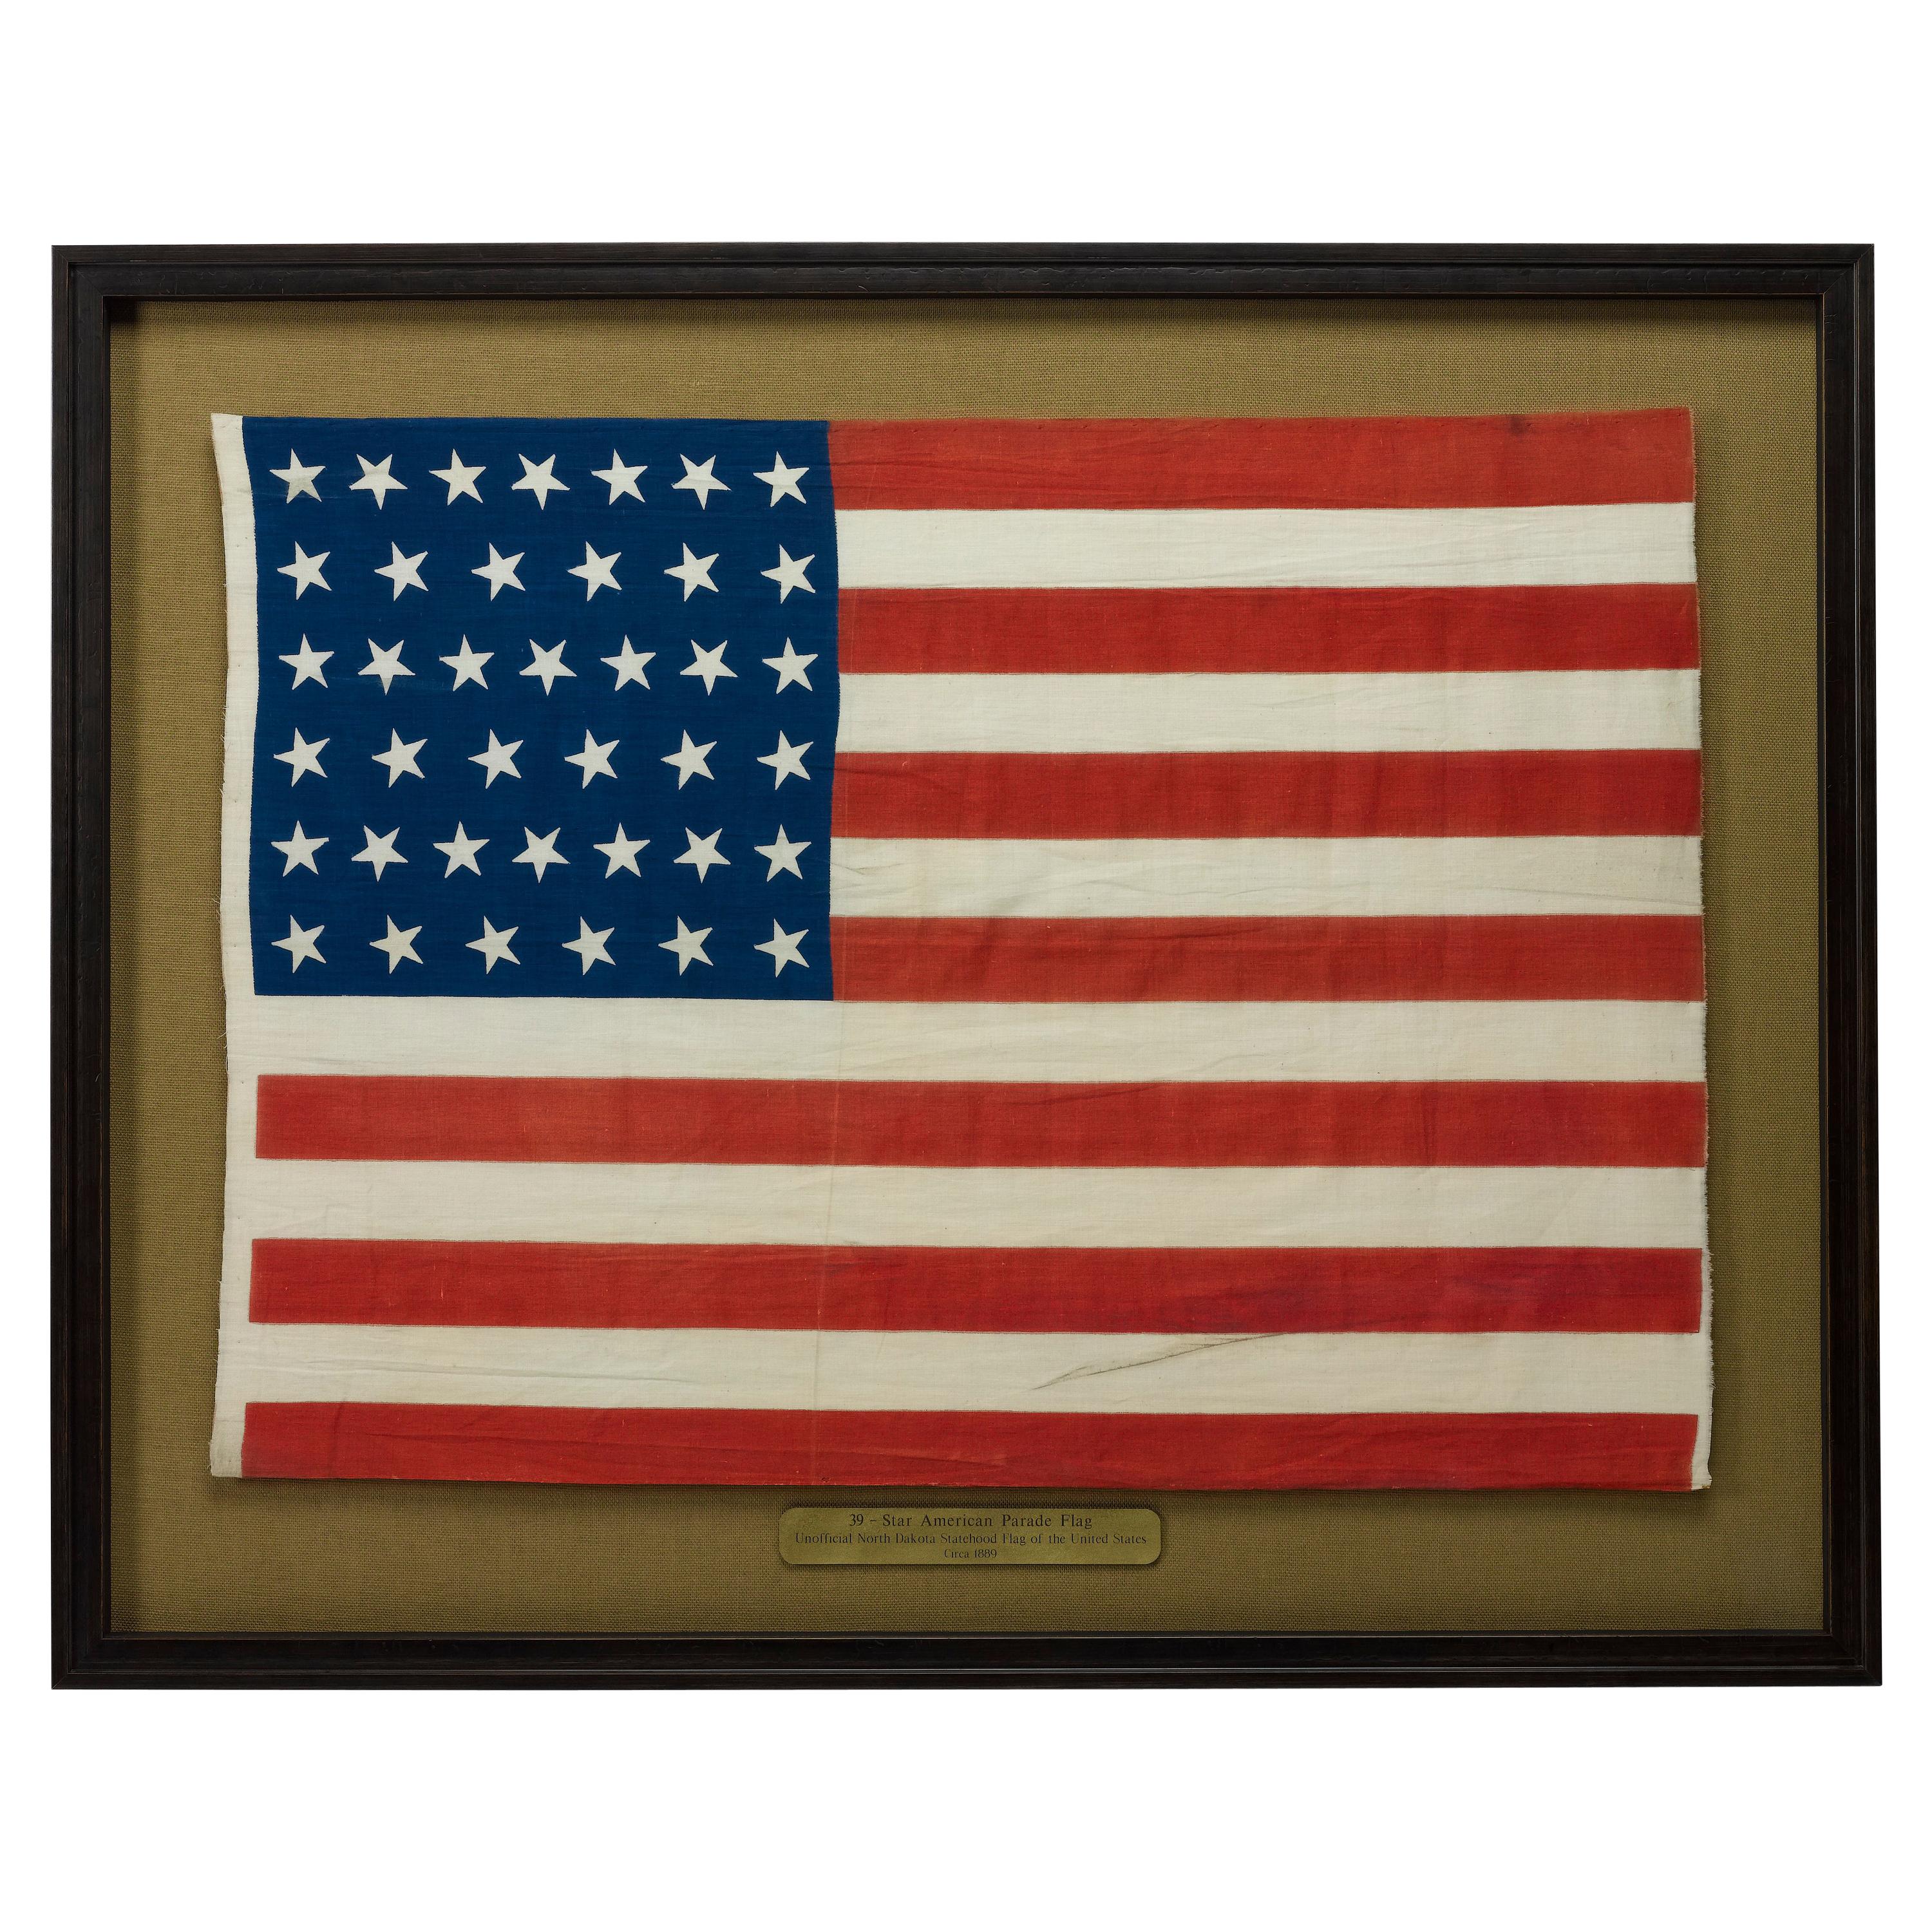 39-Star Antique American Flag with 'Whimsical' Star Pattern, 1889